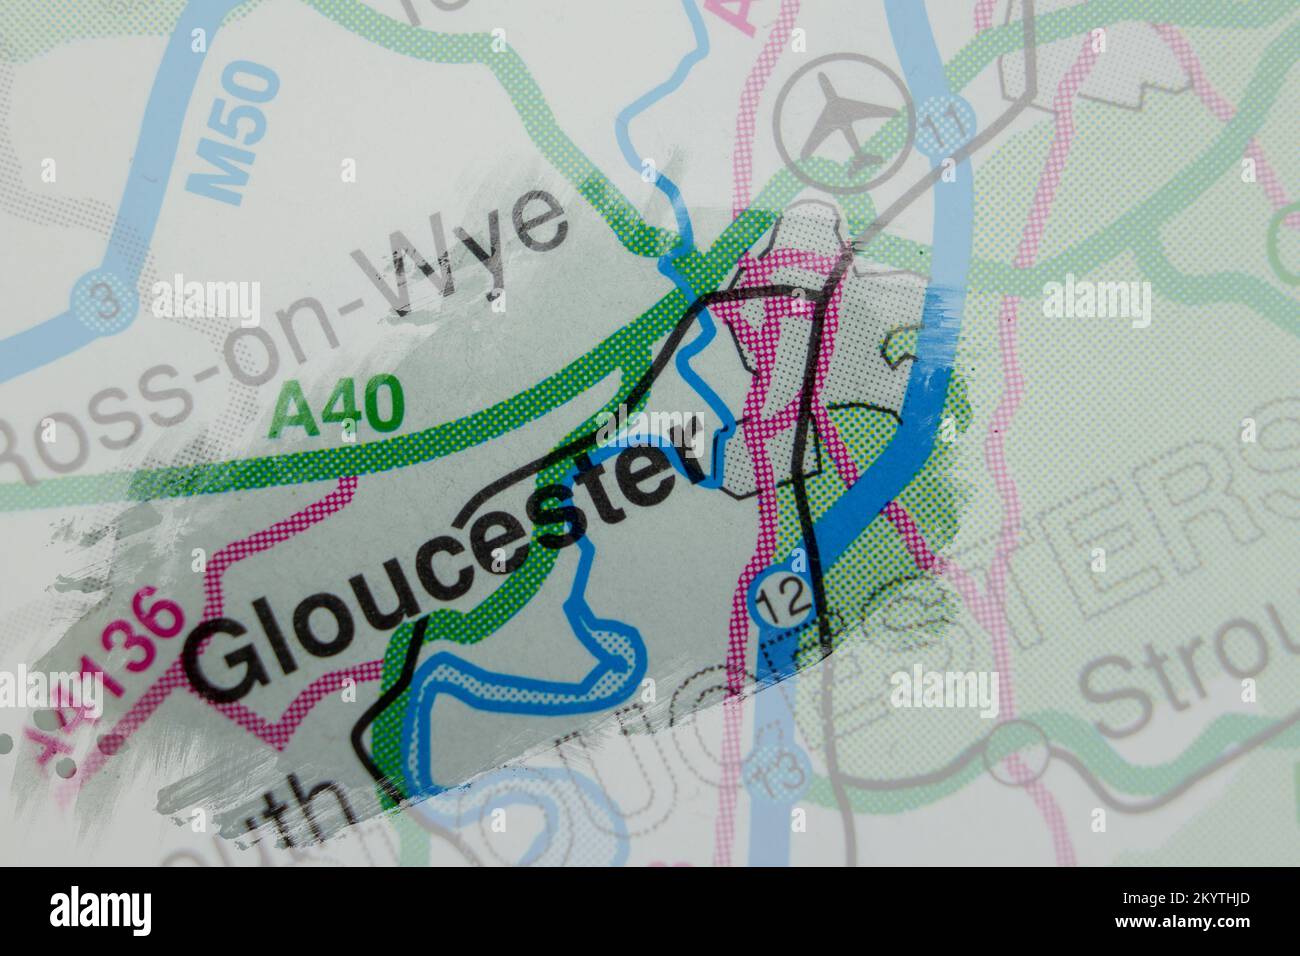 Gloucester, United Kingdom atlas map town name - paint Stock Photo